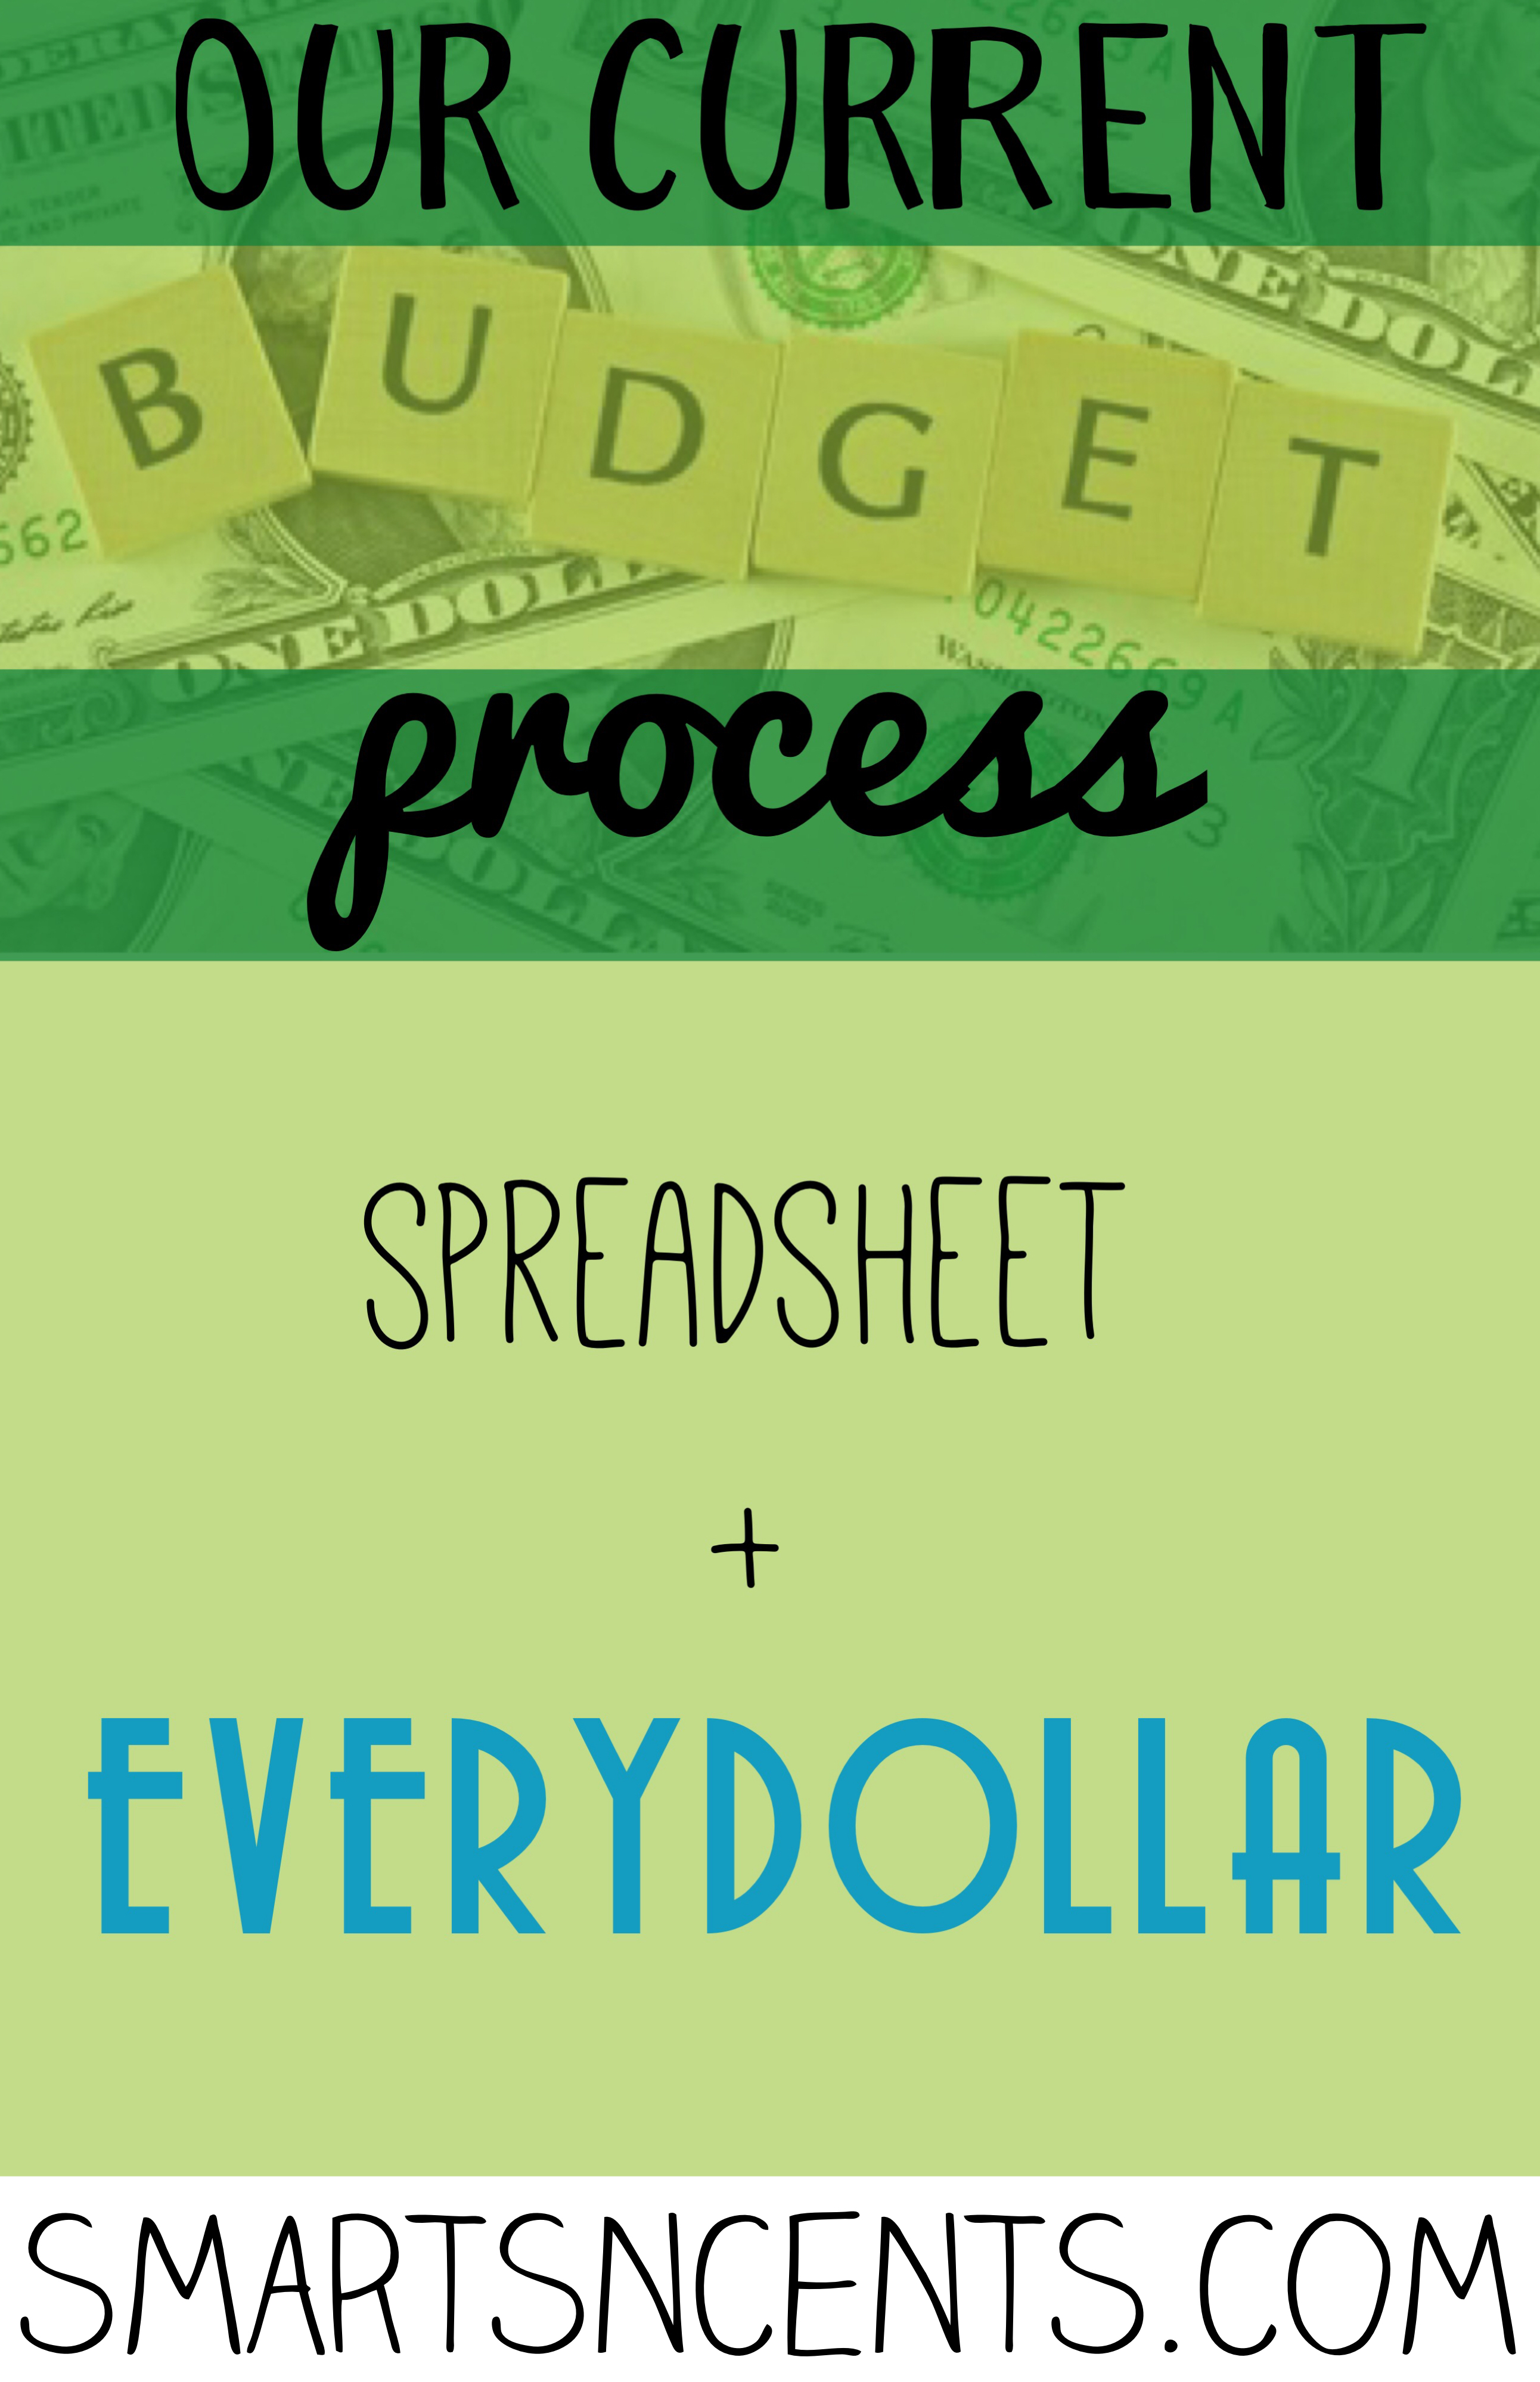 Every Dollar Spreadsheet Within Our Current Budgeting Process: Customized Spreadsheet + Everydollar